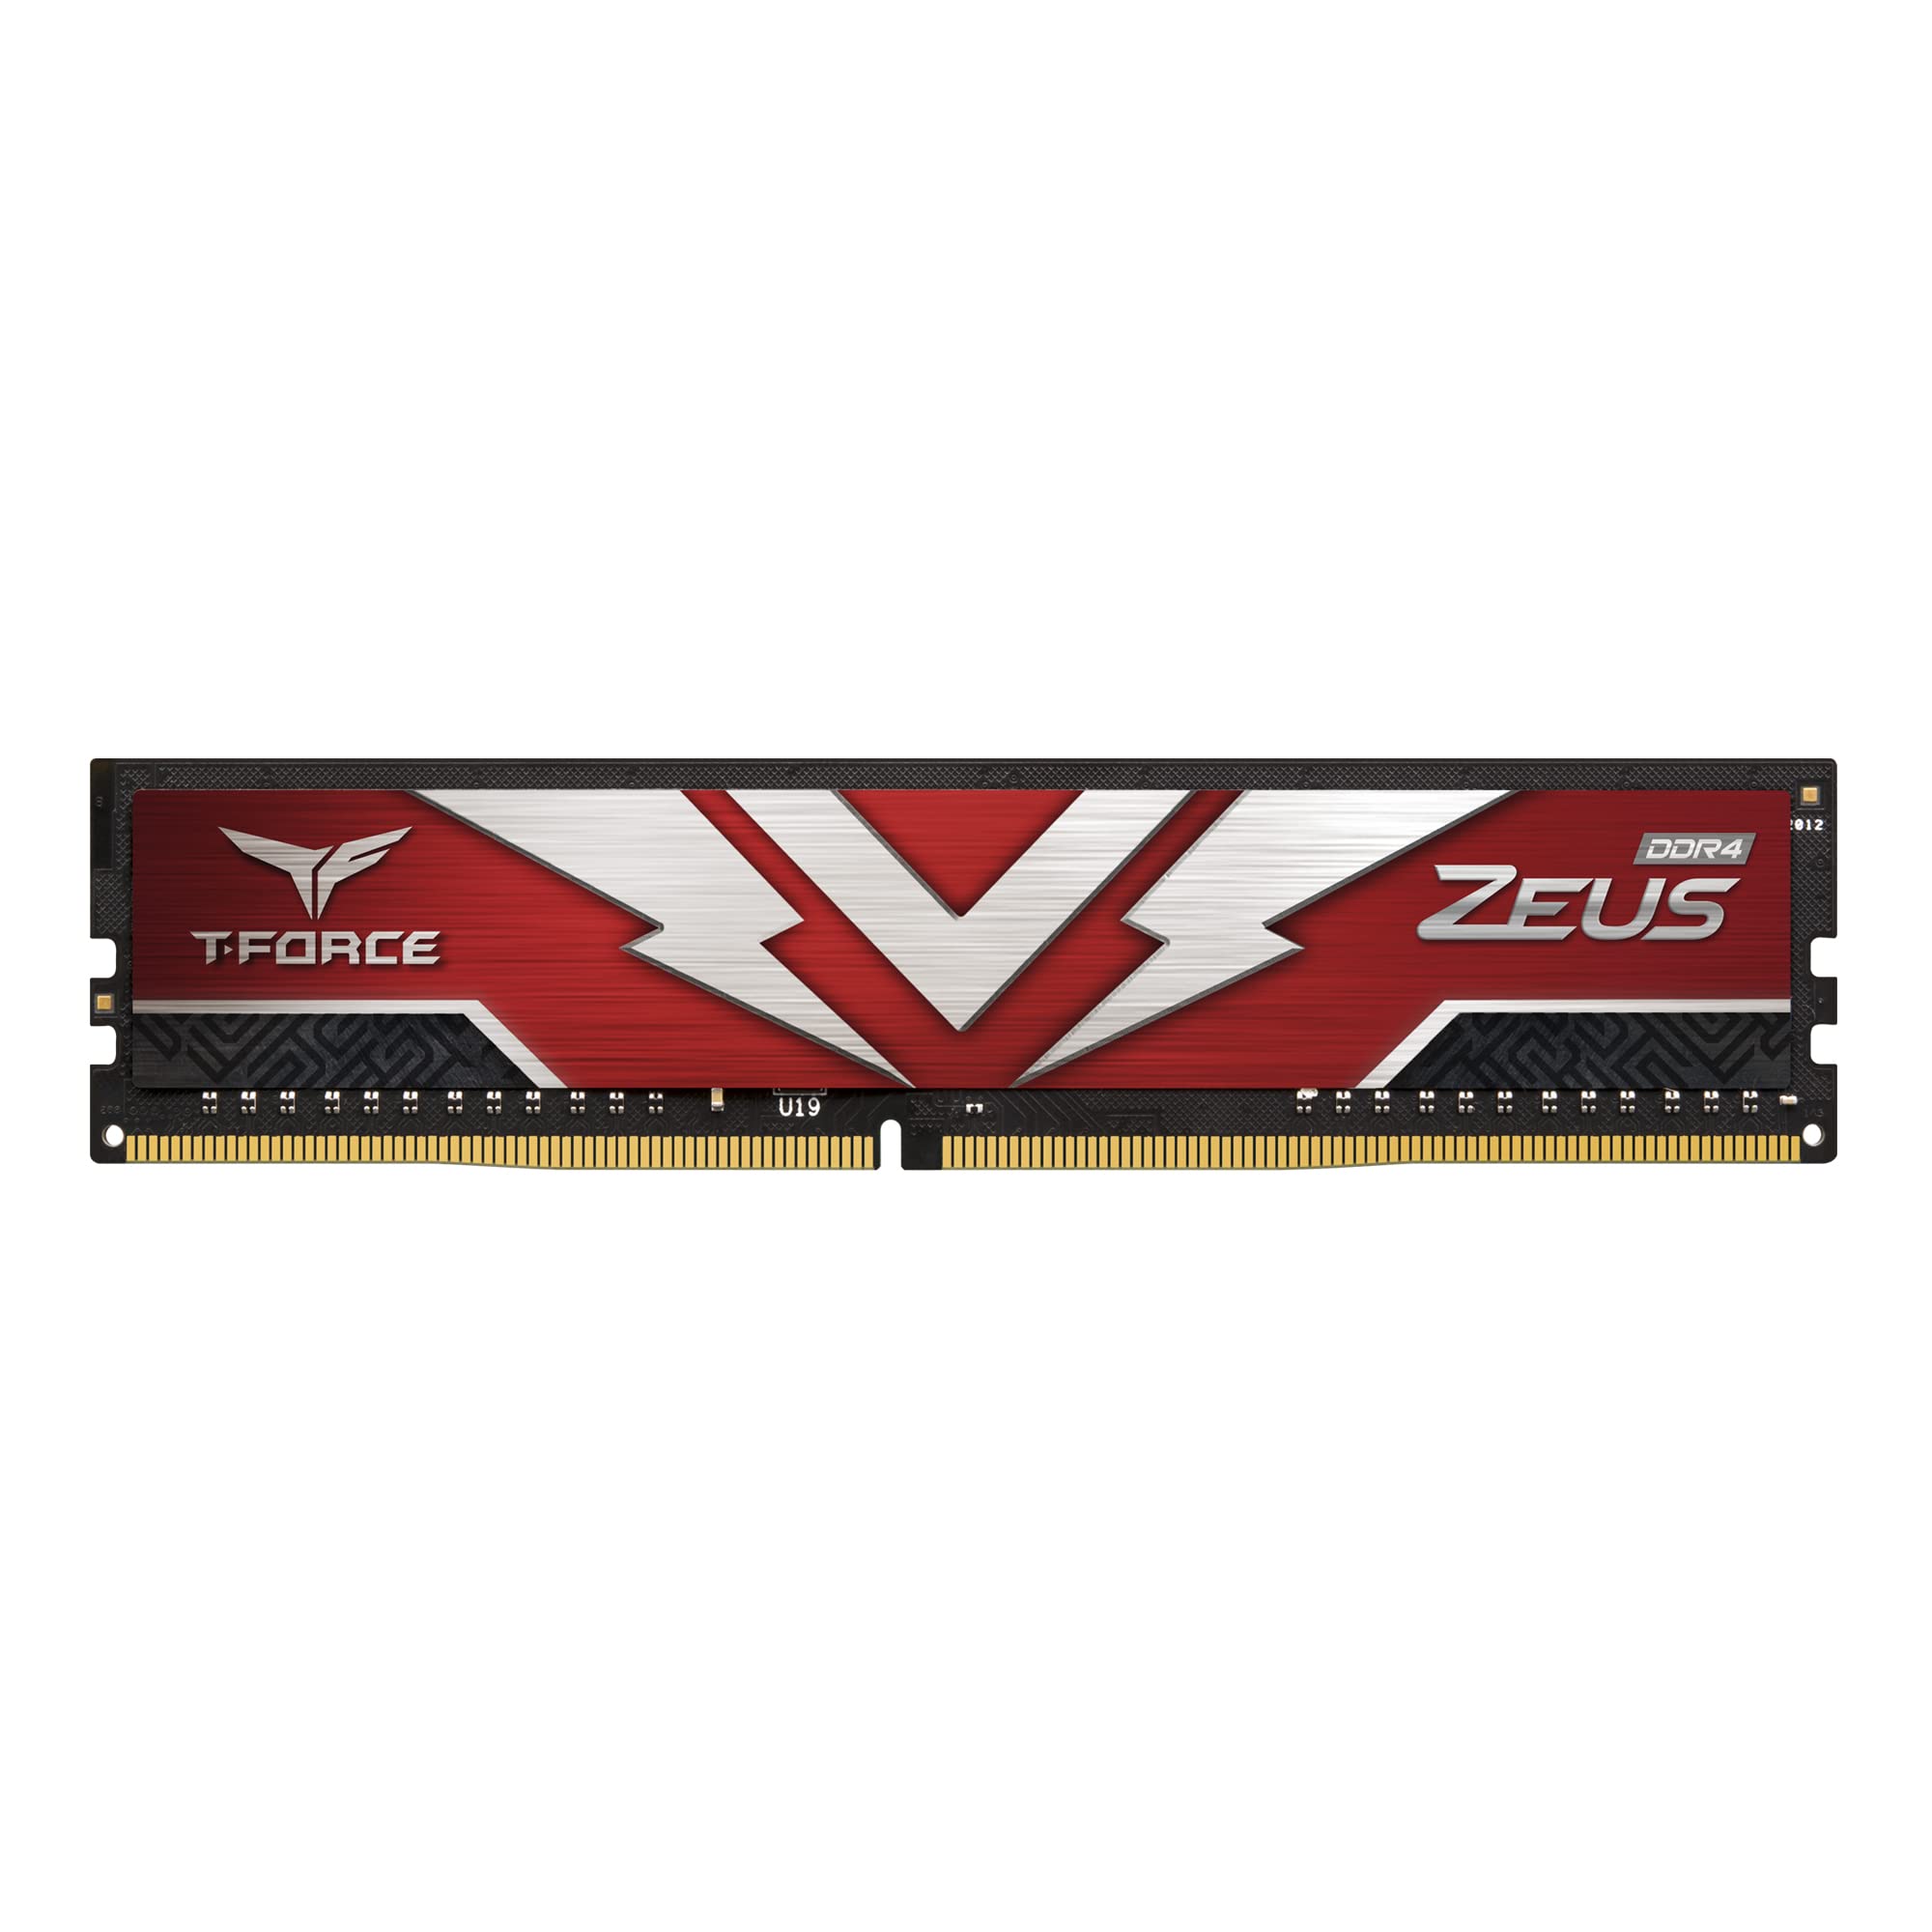 TEAMGROUP T-Force Zeus DDR4 32GB 2666MHz PC4 21300 CL19 デスクトップゲーム用メモリモジュール RAM - TTZD43